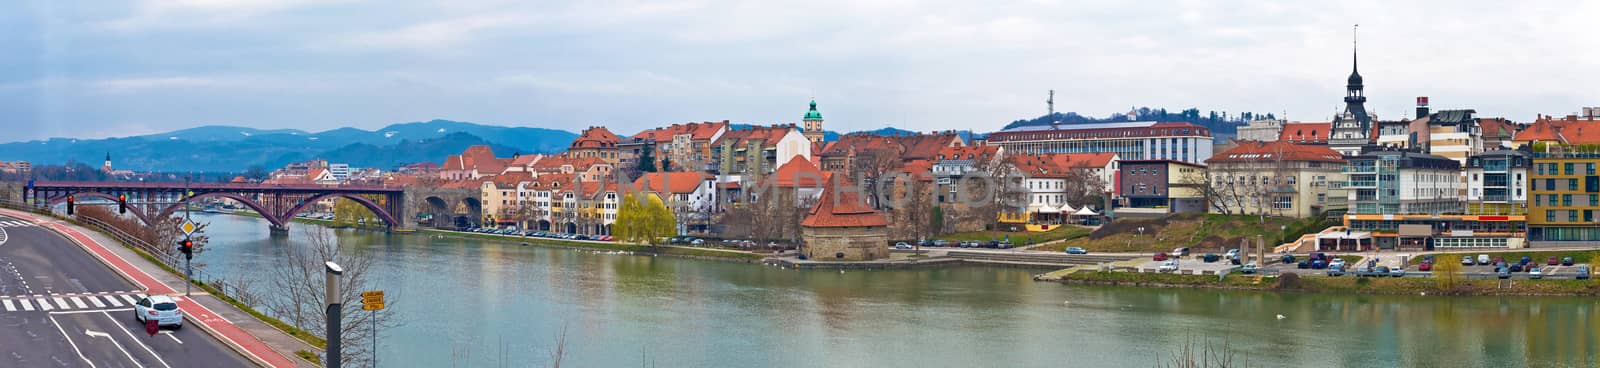 Town of Maribor riverfront panorama by xbrchx